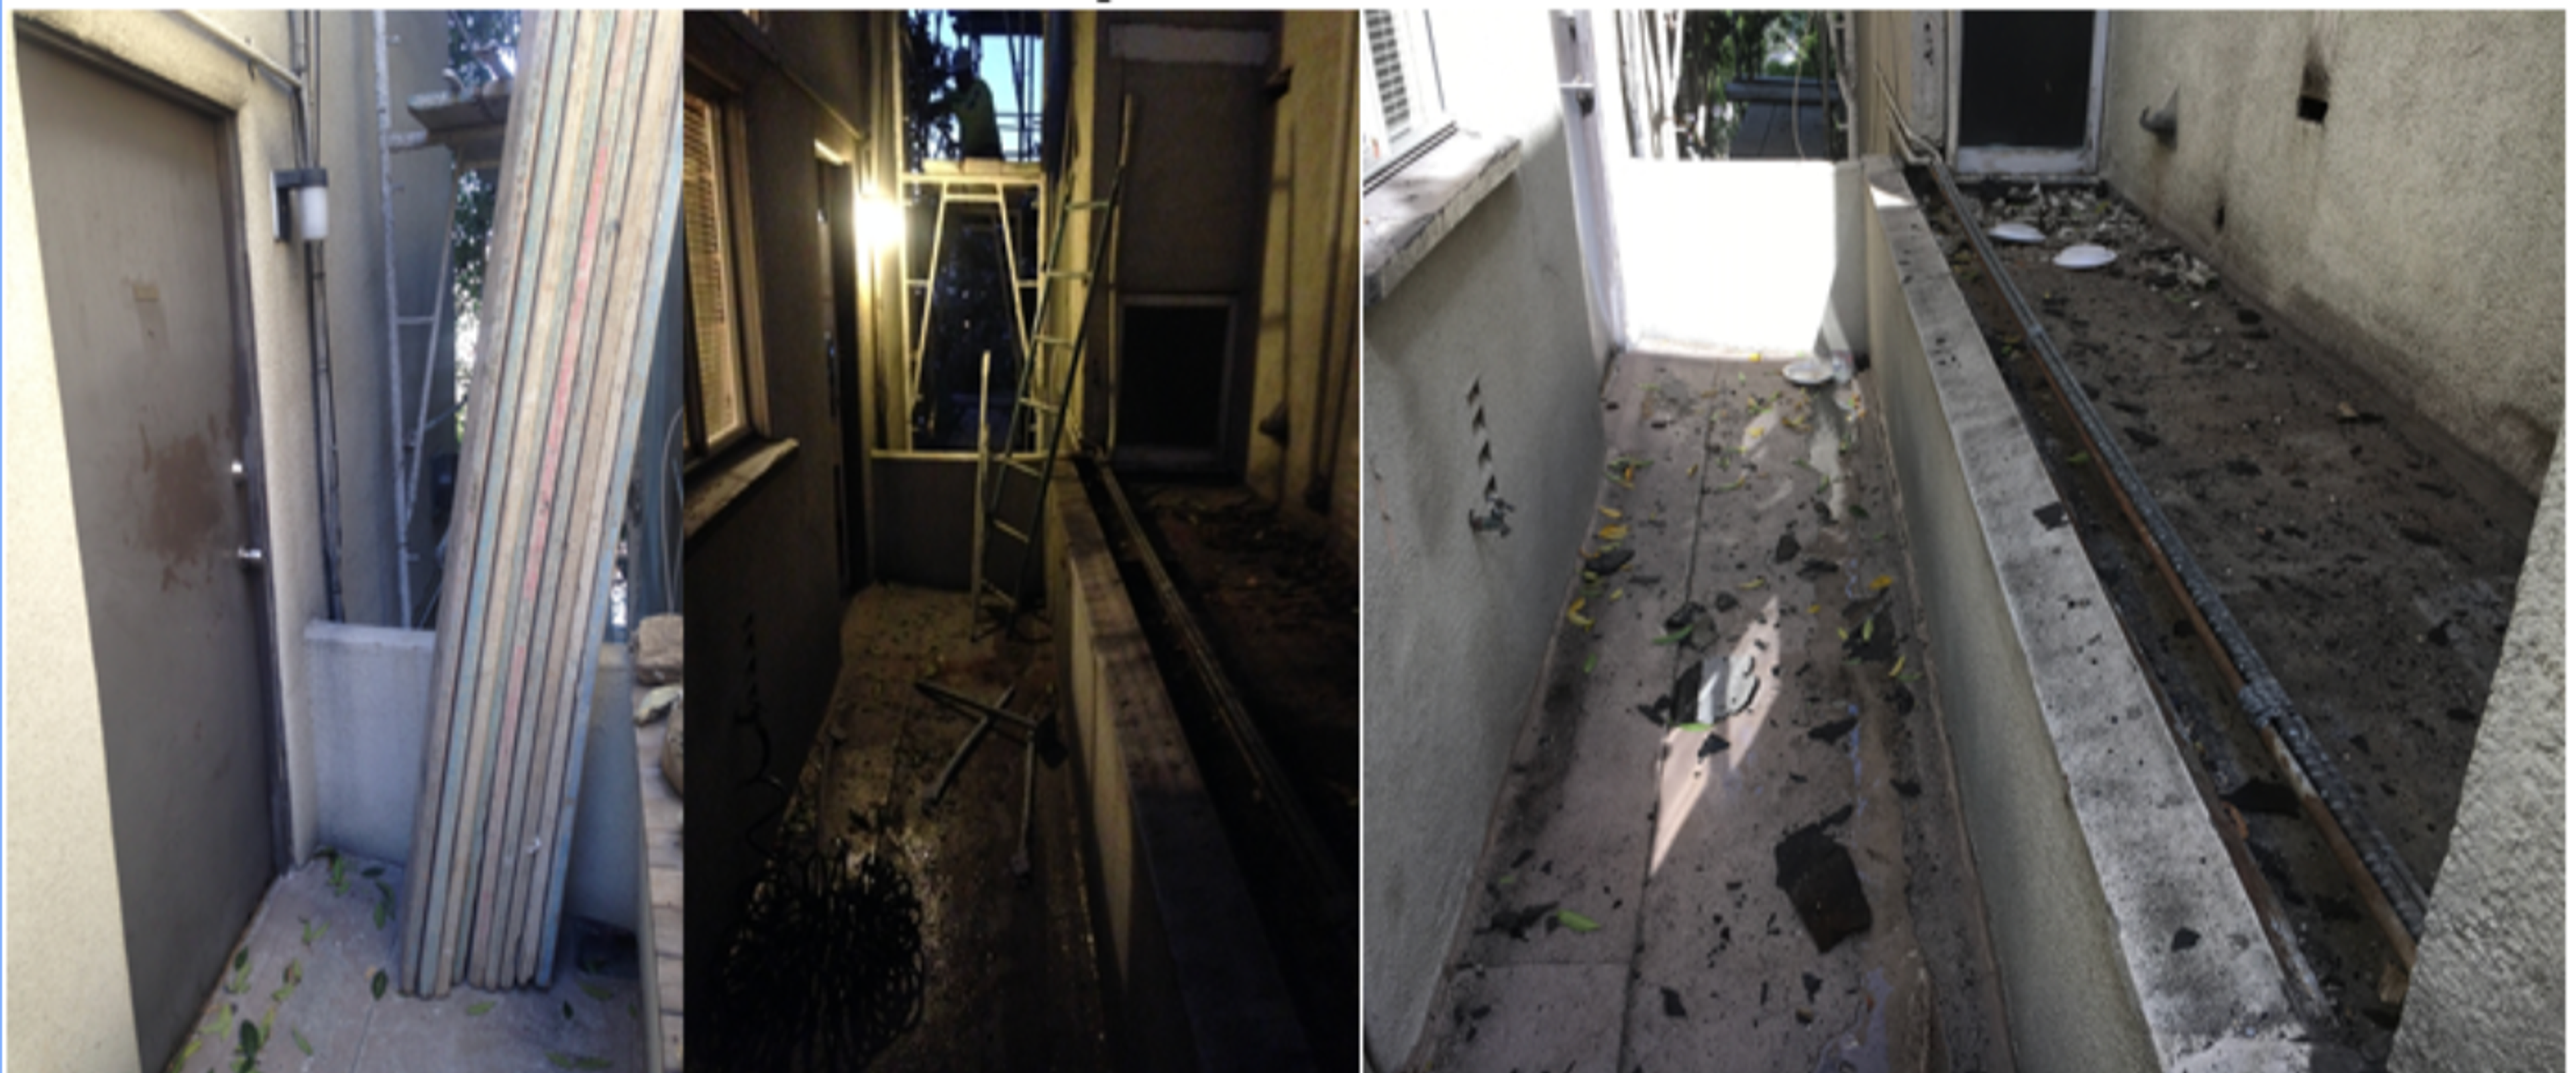 Three pictures of construction messes and damage at the Sachs Apartments